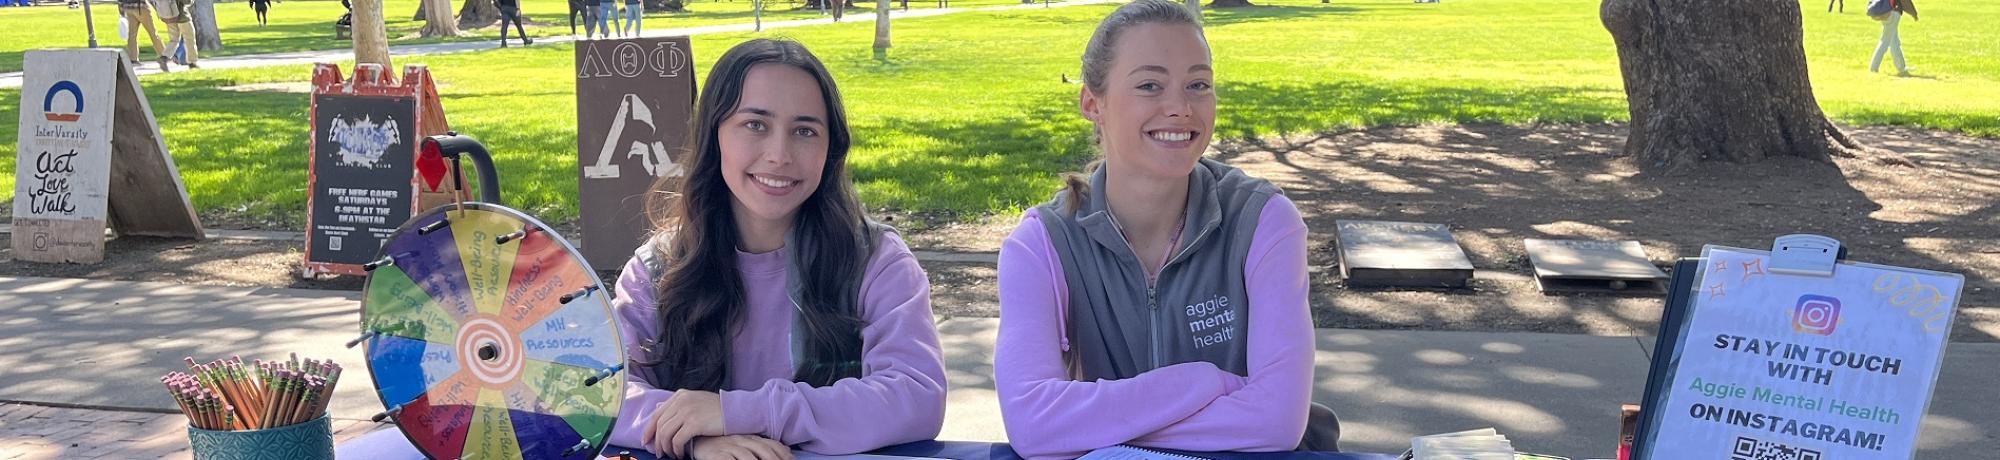 two students sitting at a table with a tablecloth saying "aggie mental health"